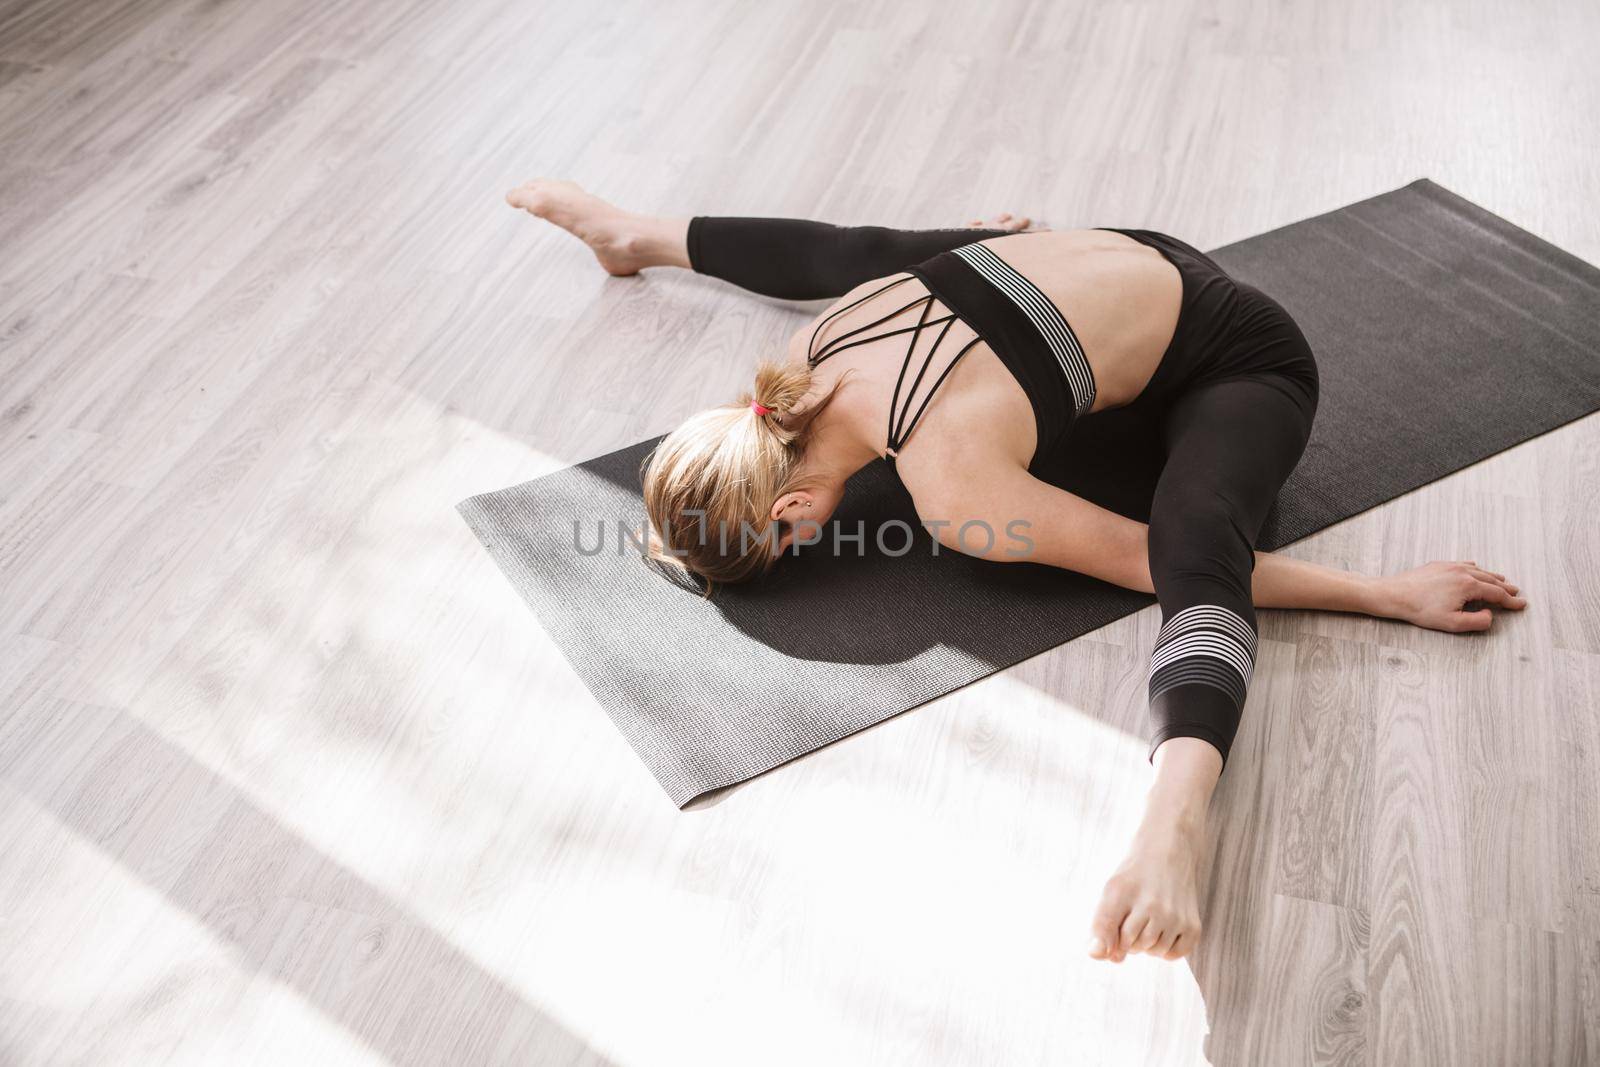 Top view shot of a flexible female gymnast stretching on gym floor, copy space